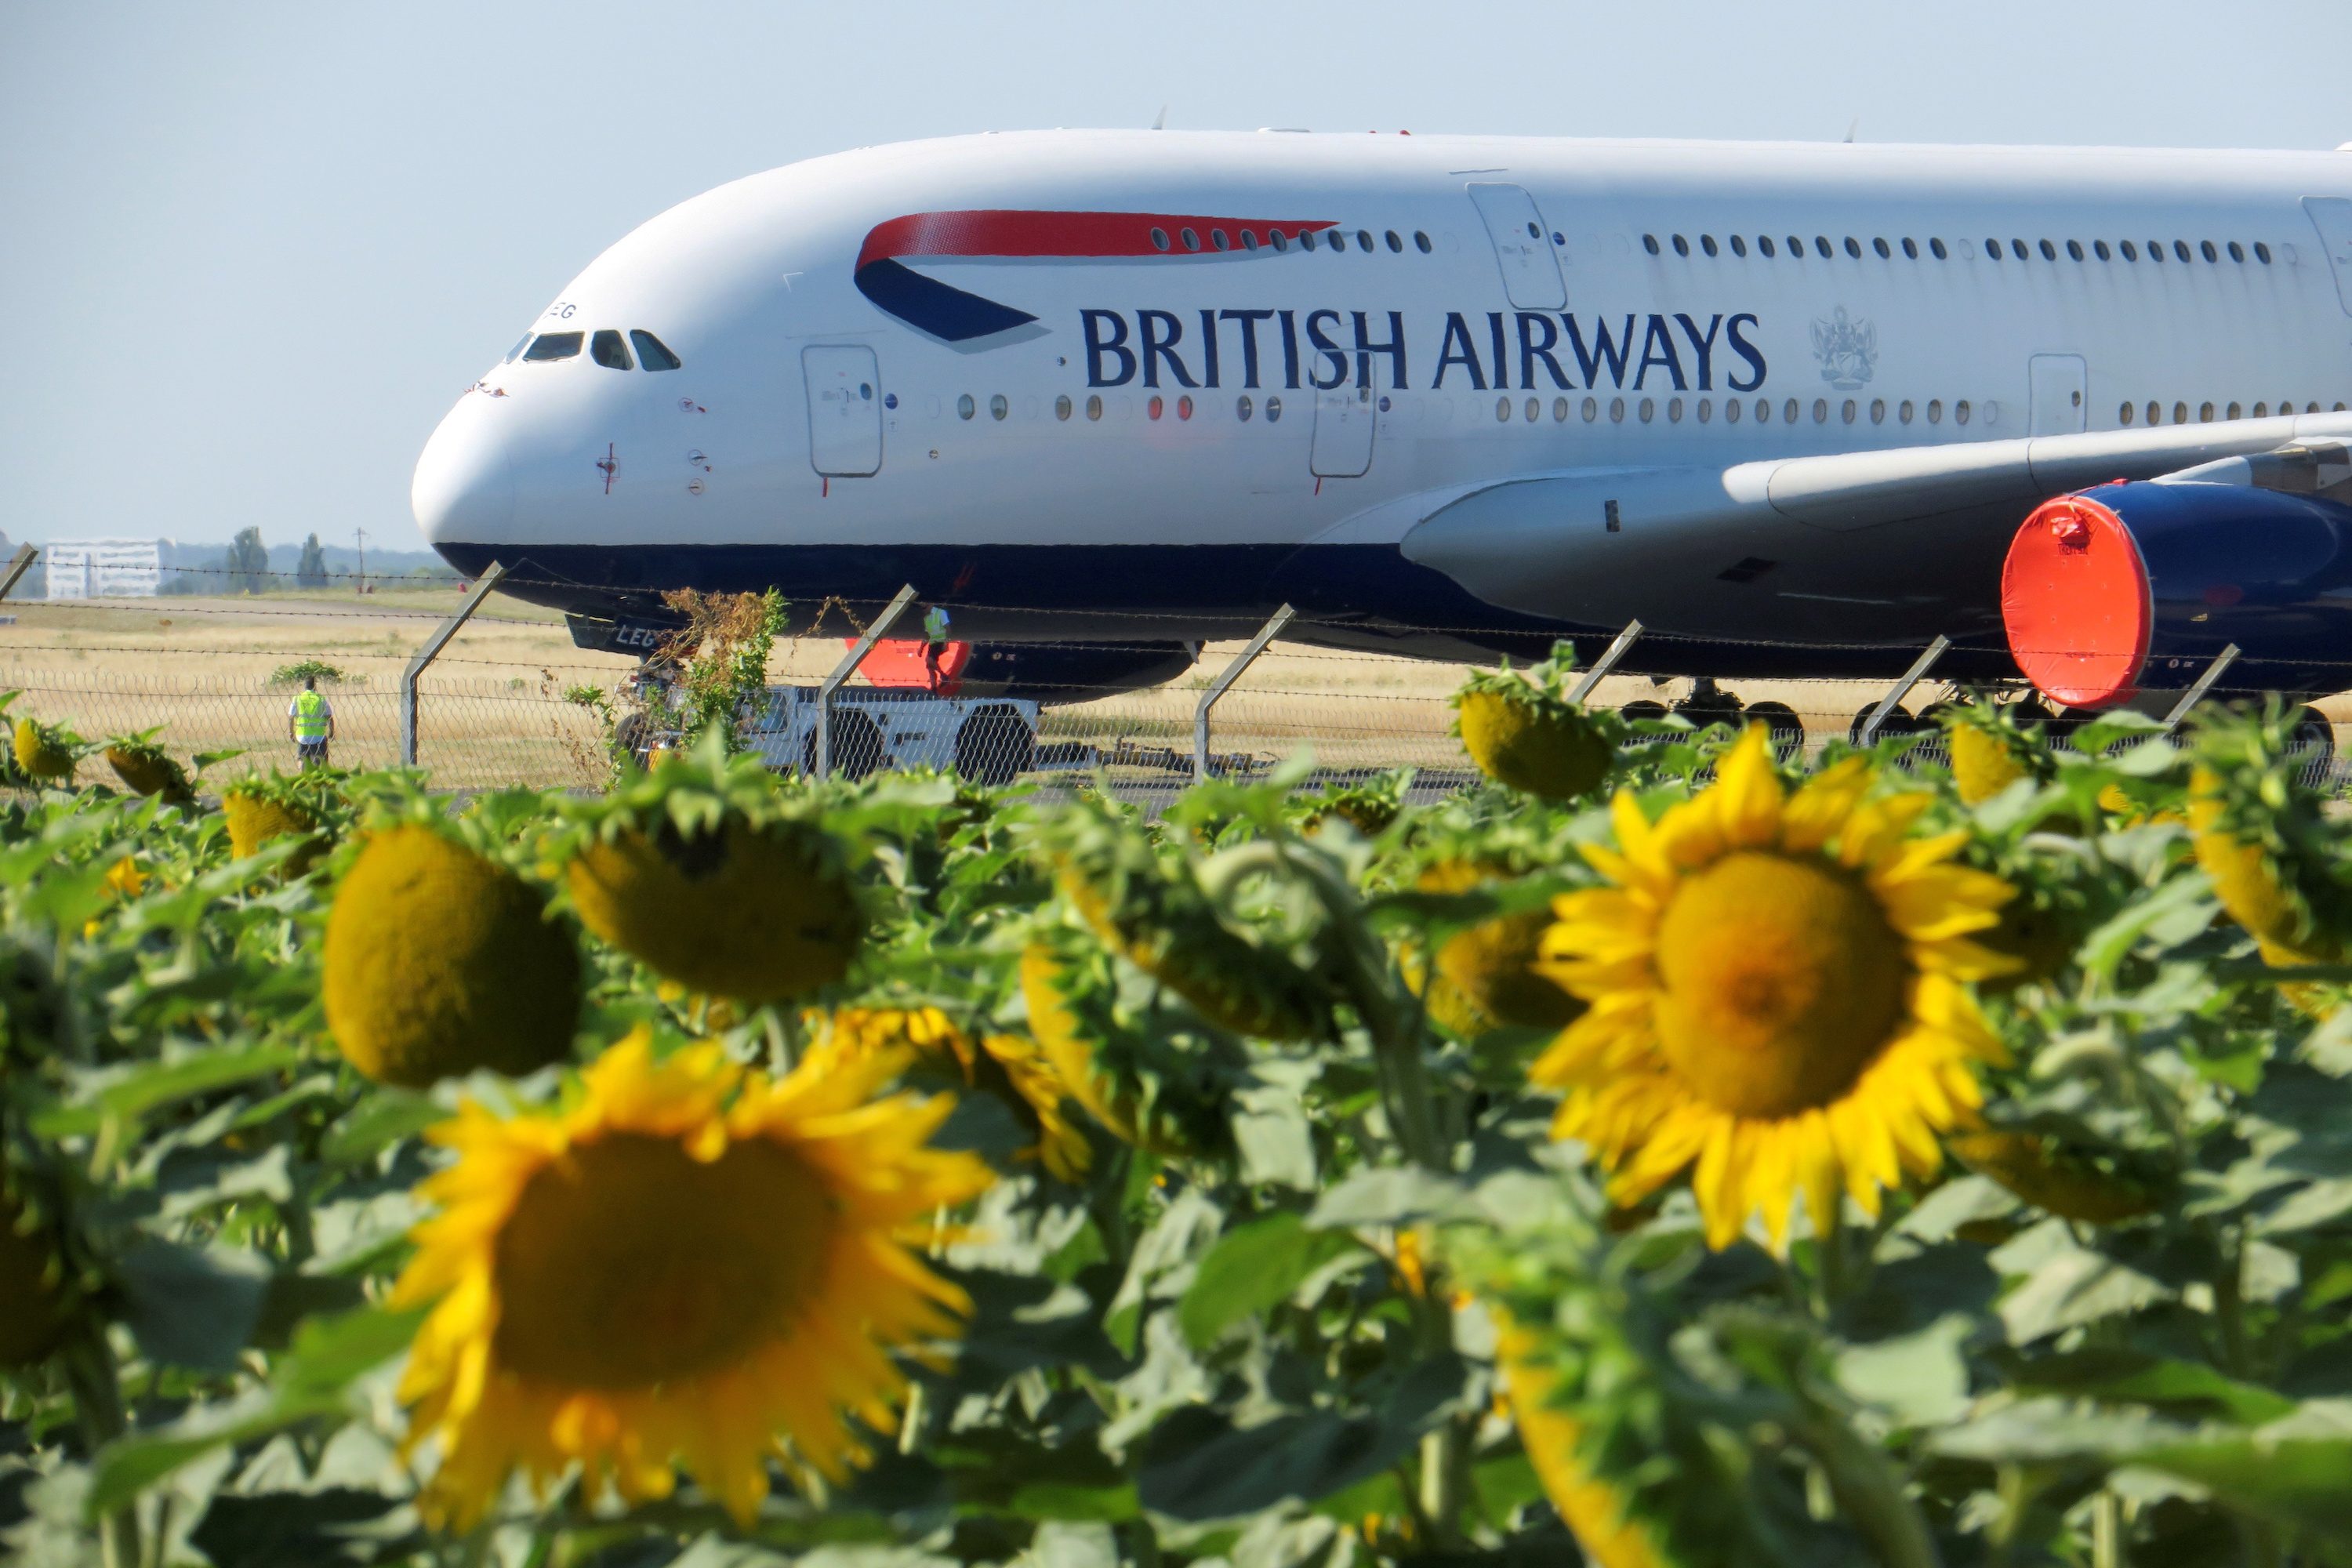 British Airways owner IAG expects travel recovery from July 2021